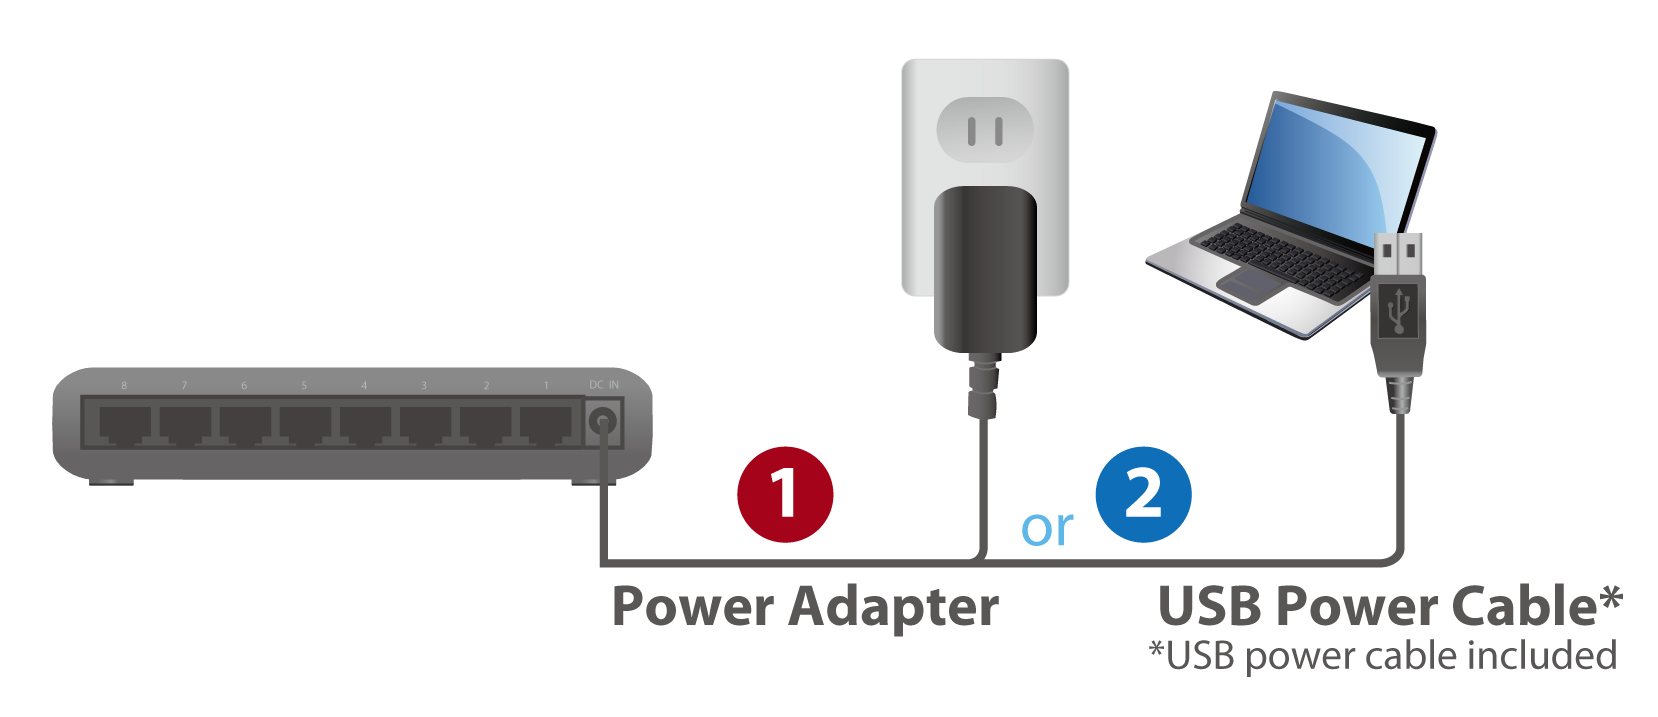 Optional Power Supply with an additional USB Power Cable